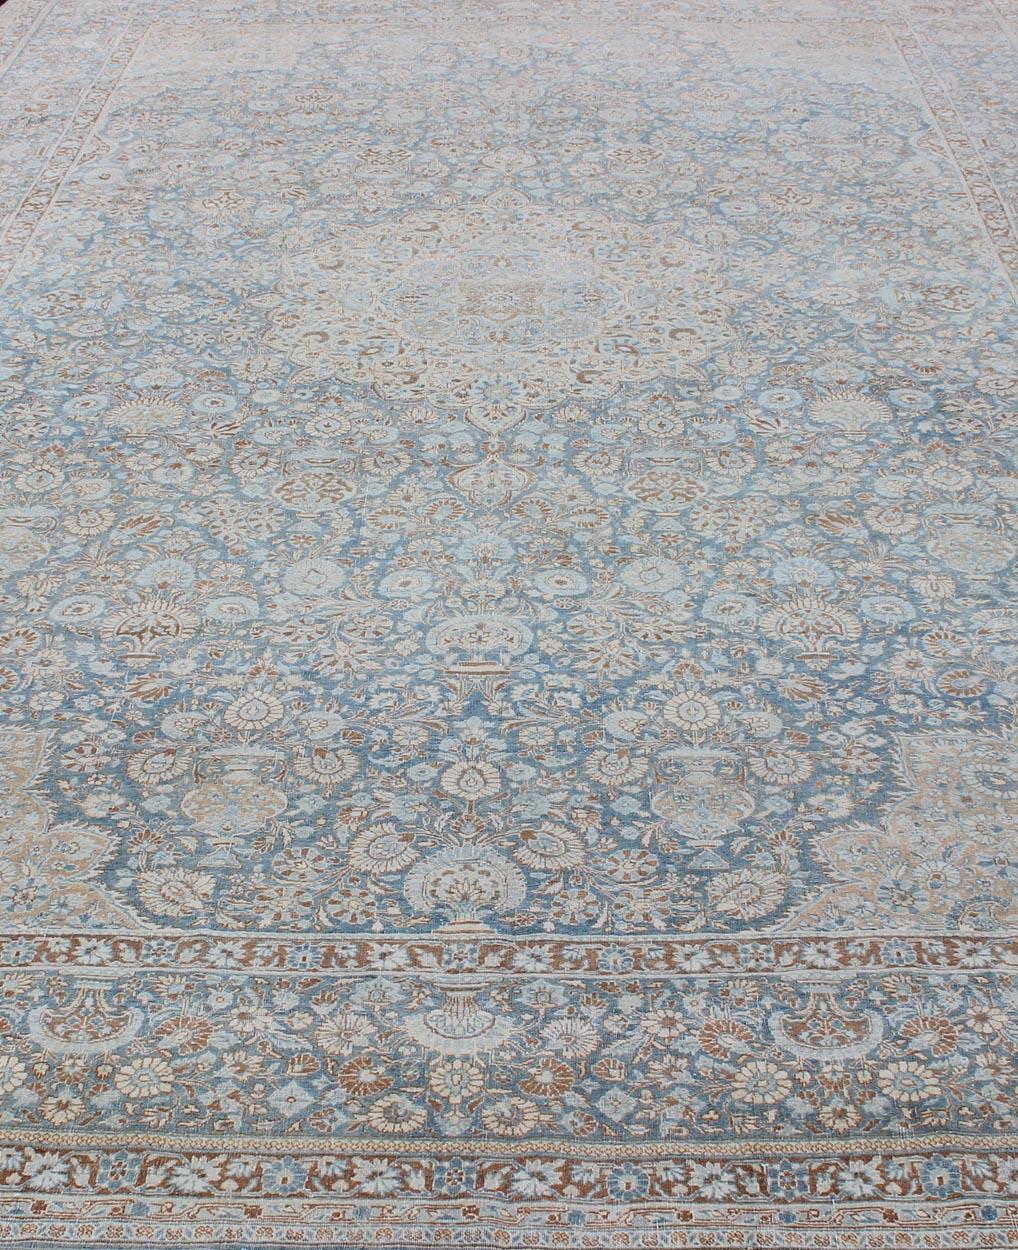 Antique Hand Knotted Persian Tabriz Rug with Intricate Floral Medallion  3